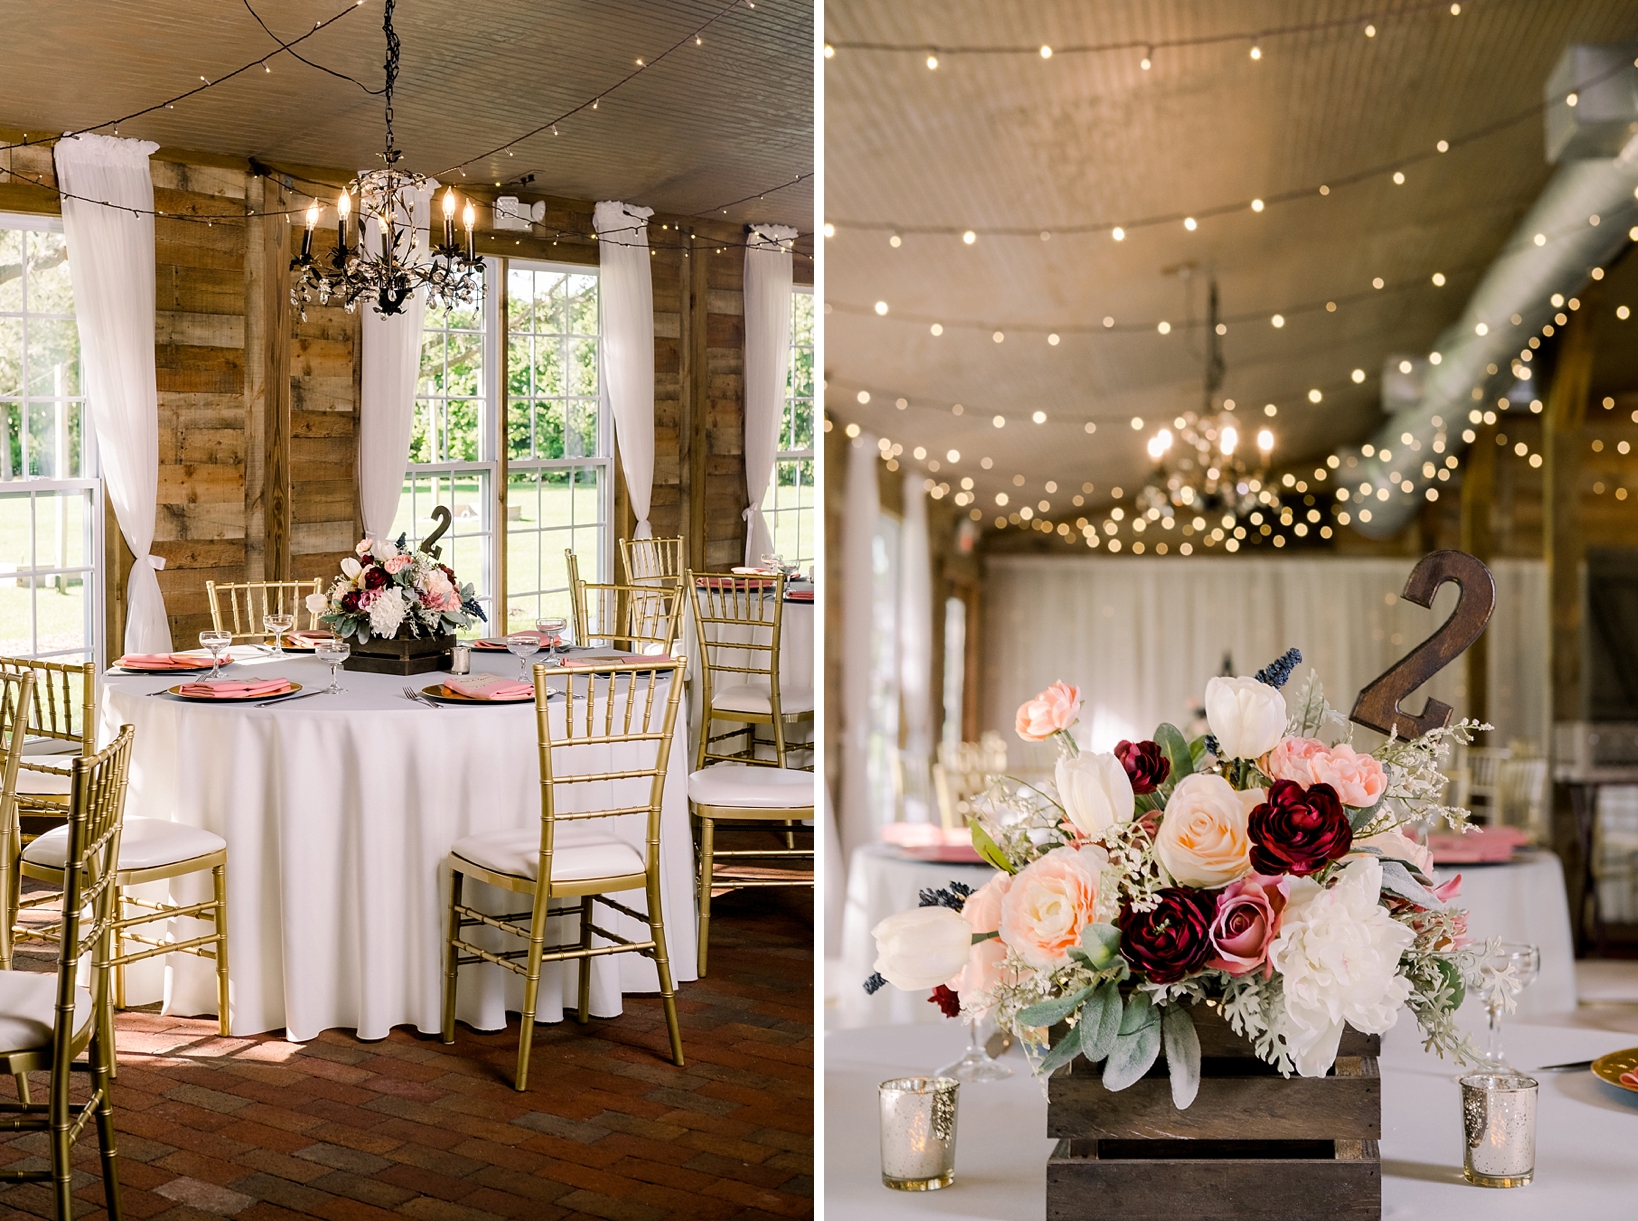 The reception barn at Cross Creek Ranch on the wedding day filled with lights and flowers